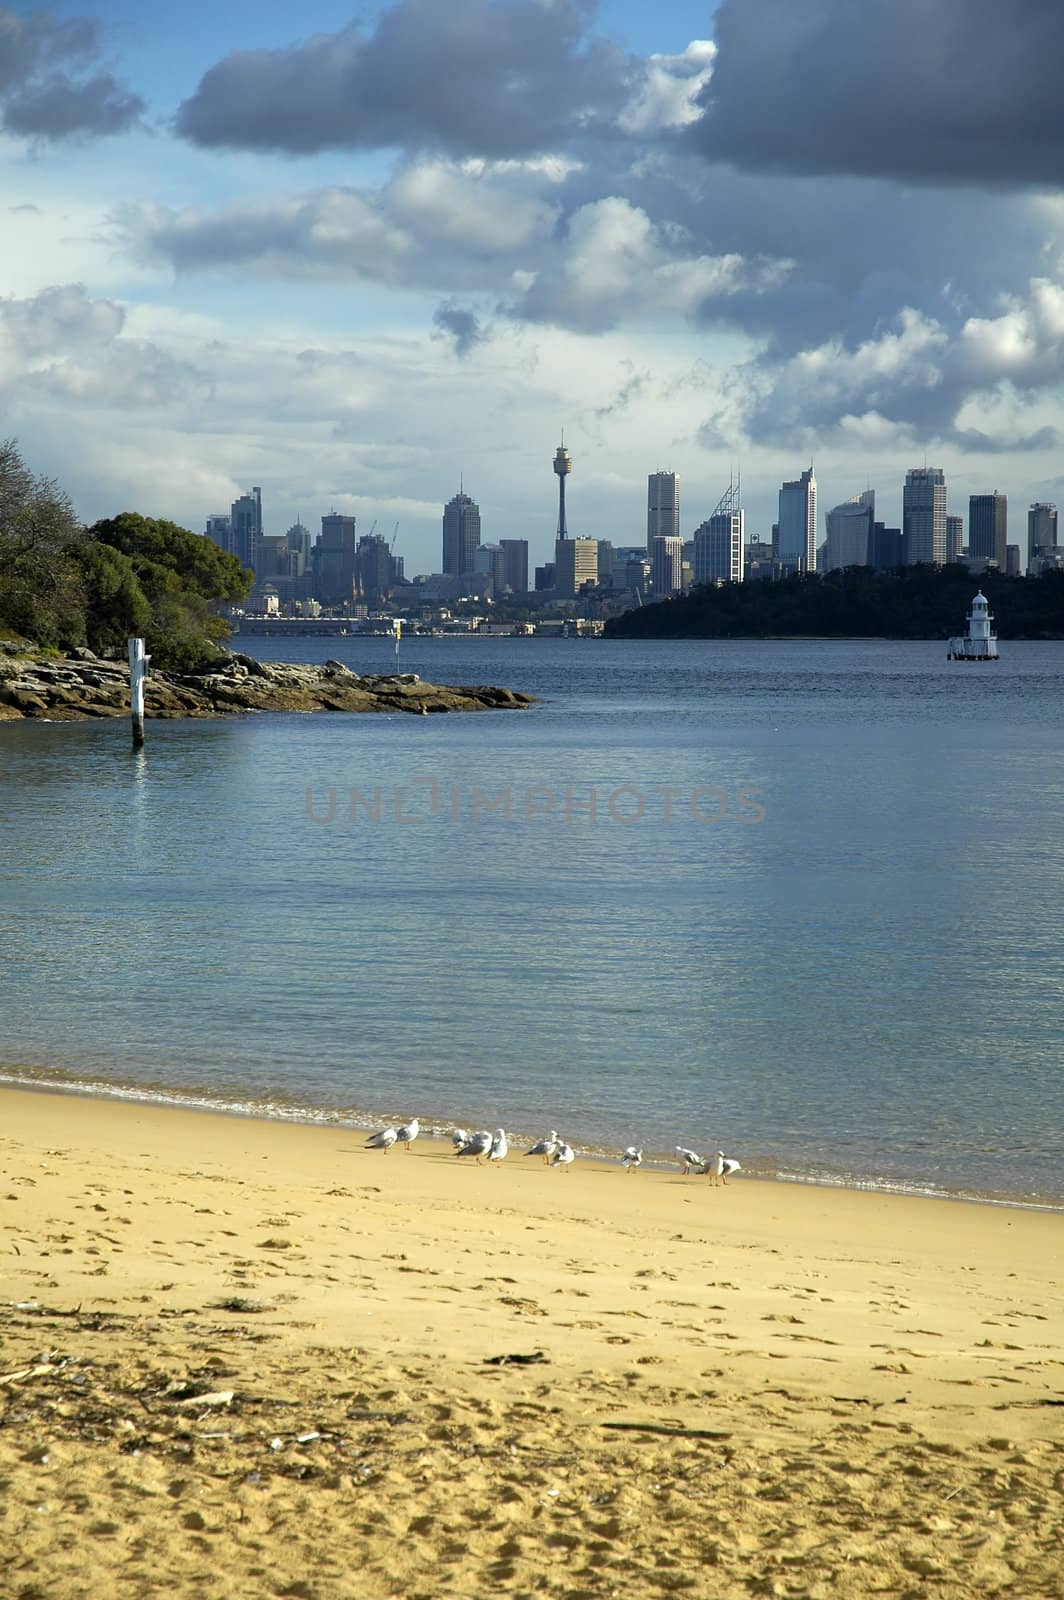 Sydney CBD in distance, Sydney Tower visible, beach with seagulls in foreground,